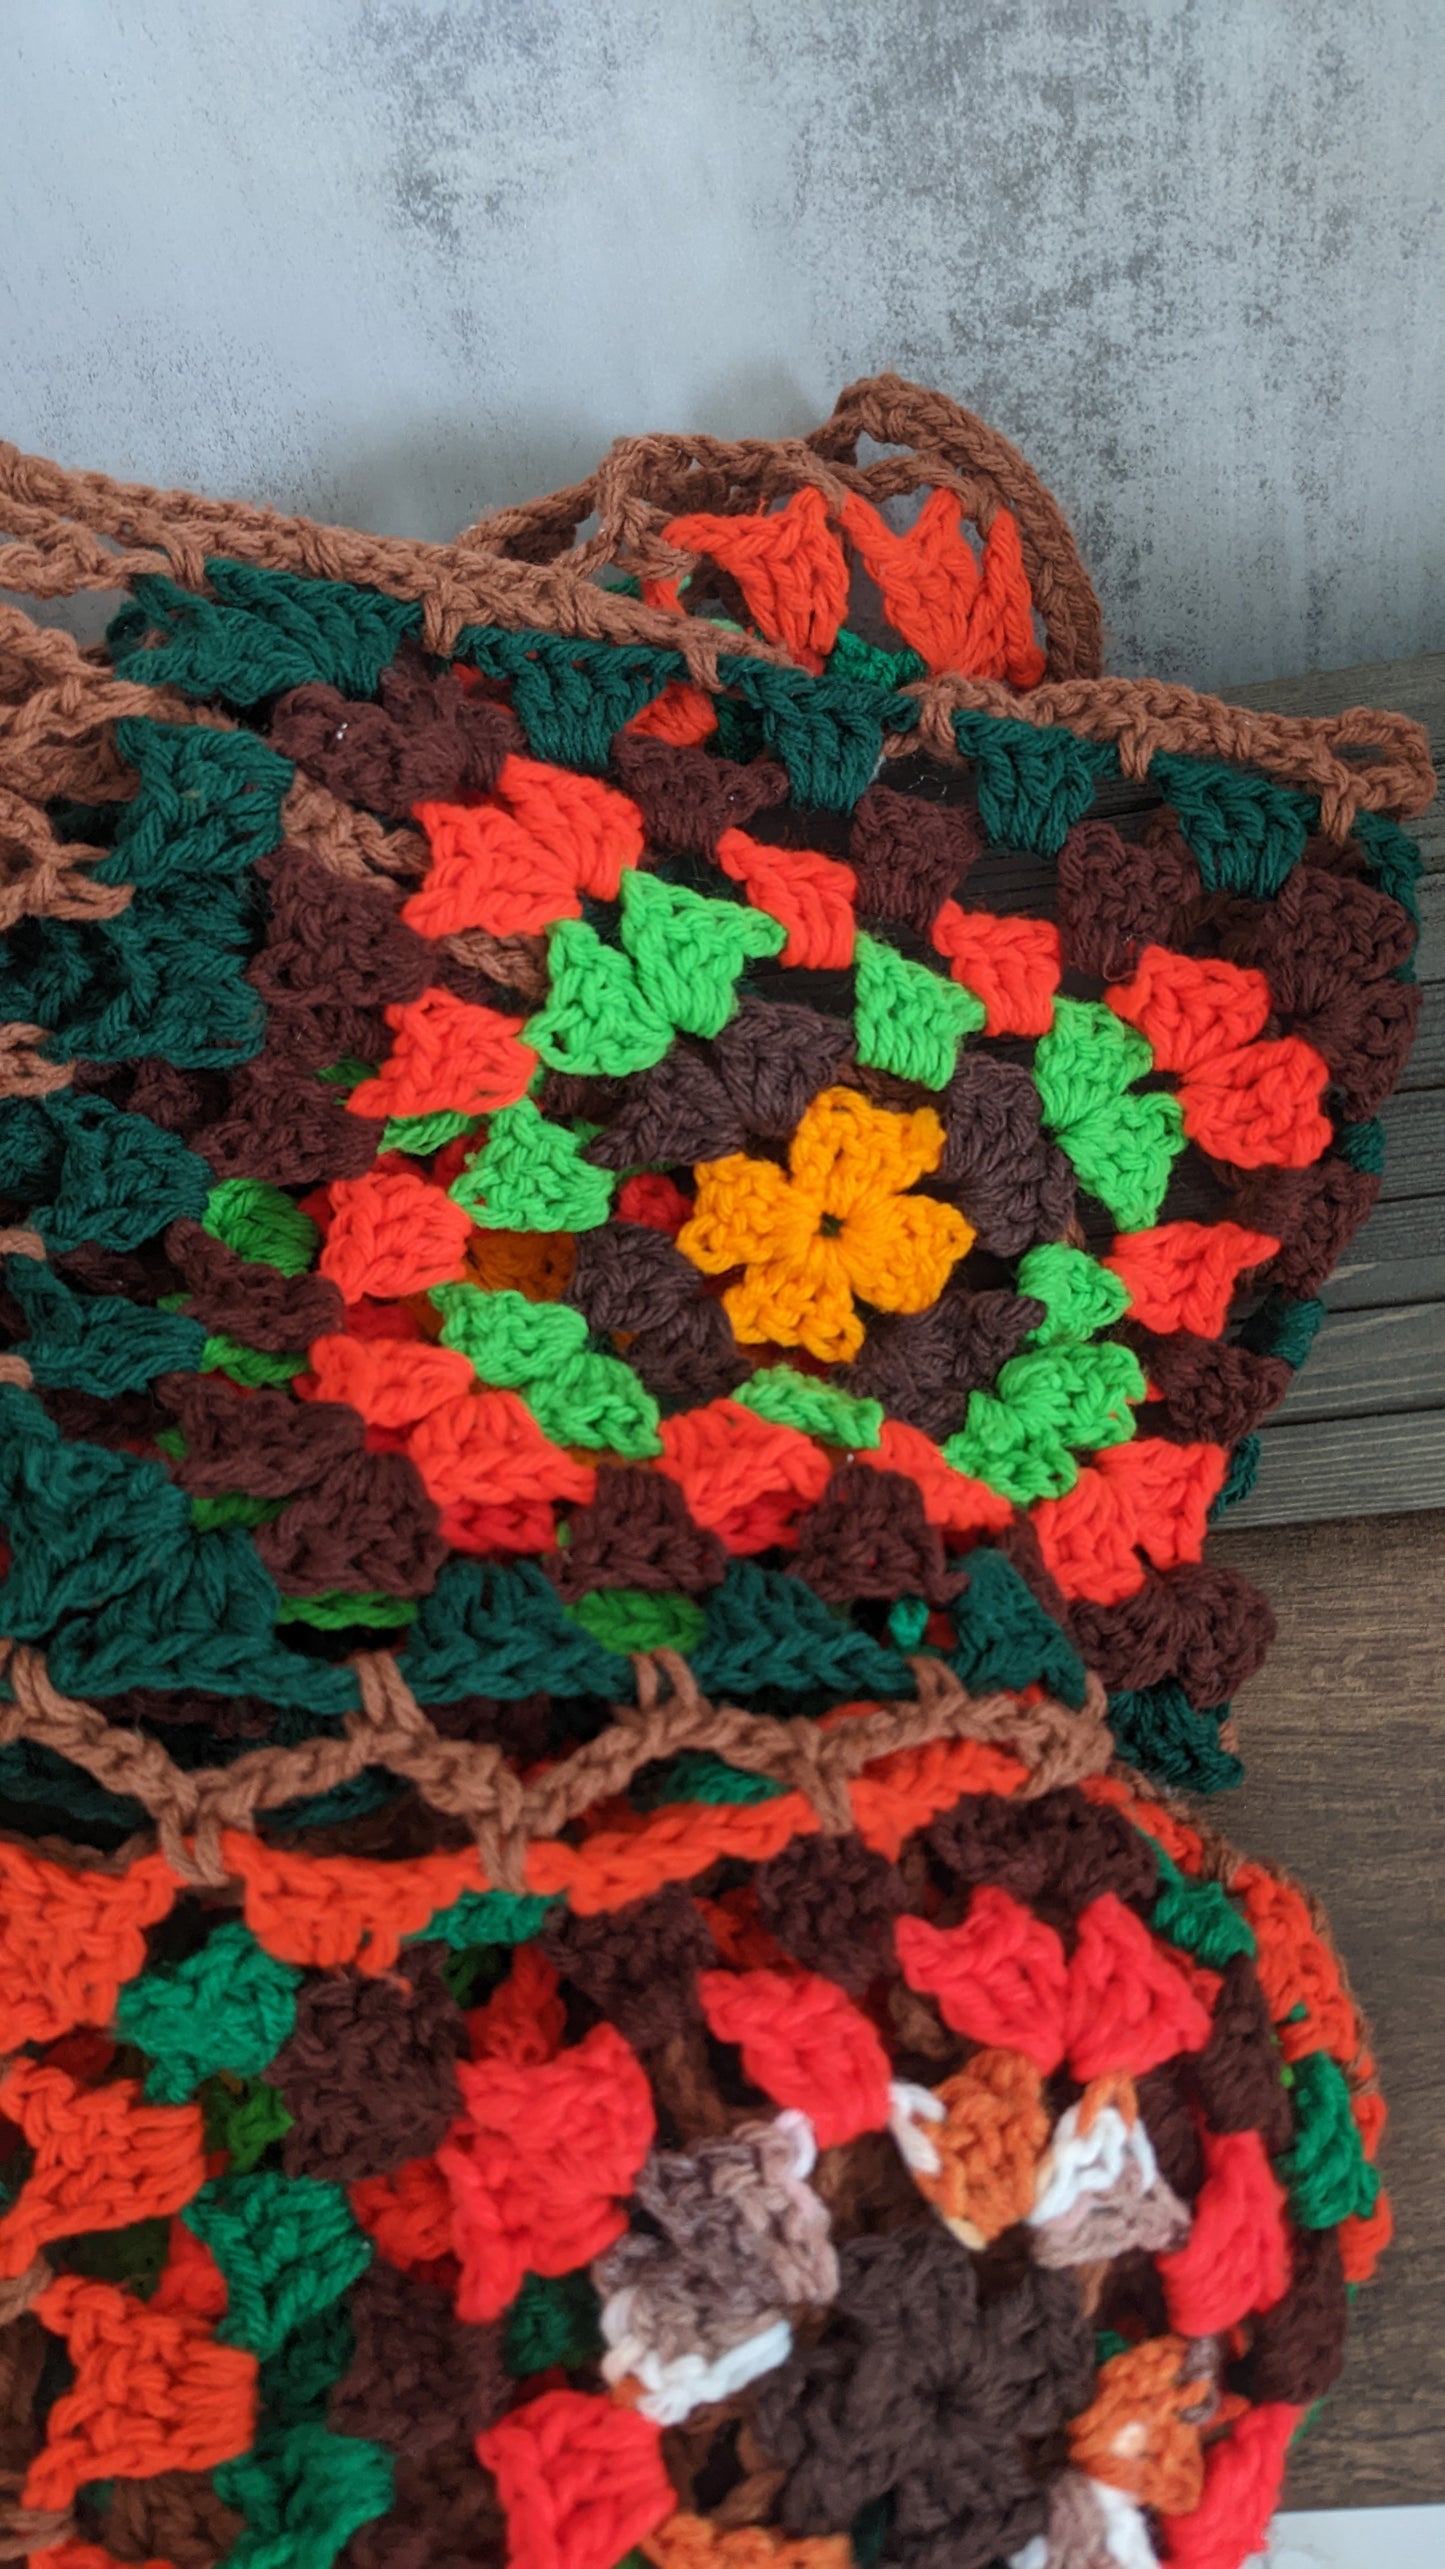 HandMade Brown, Red, Yellow, Orange and Green Granny Square Afghan 81"x95" Pumpkin Patch